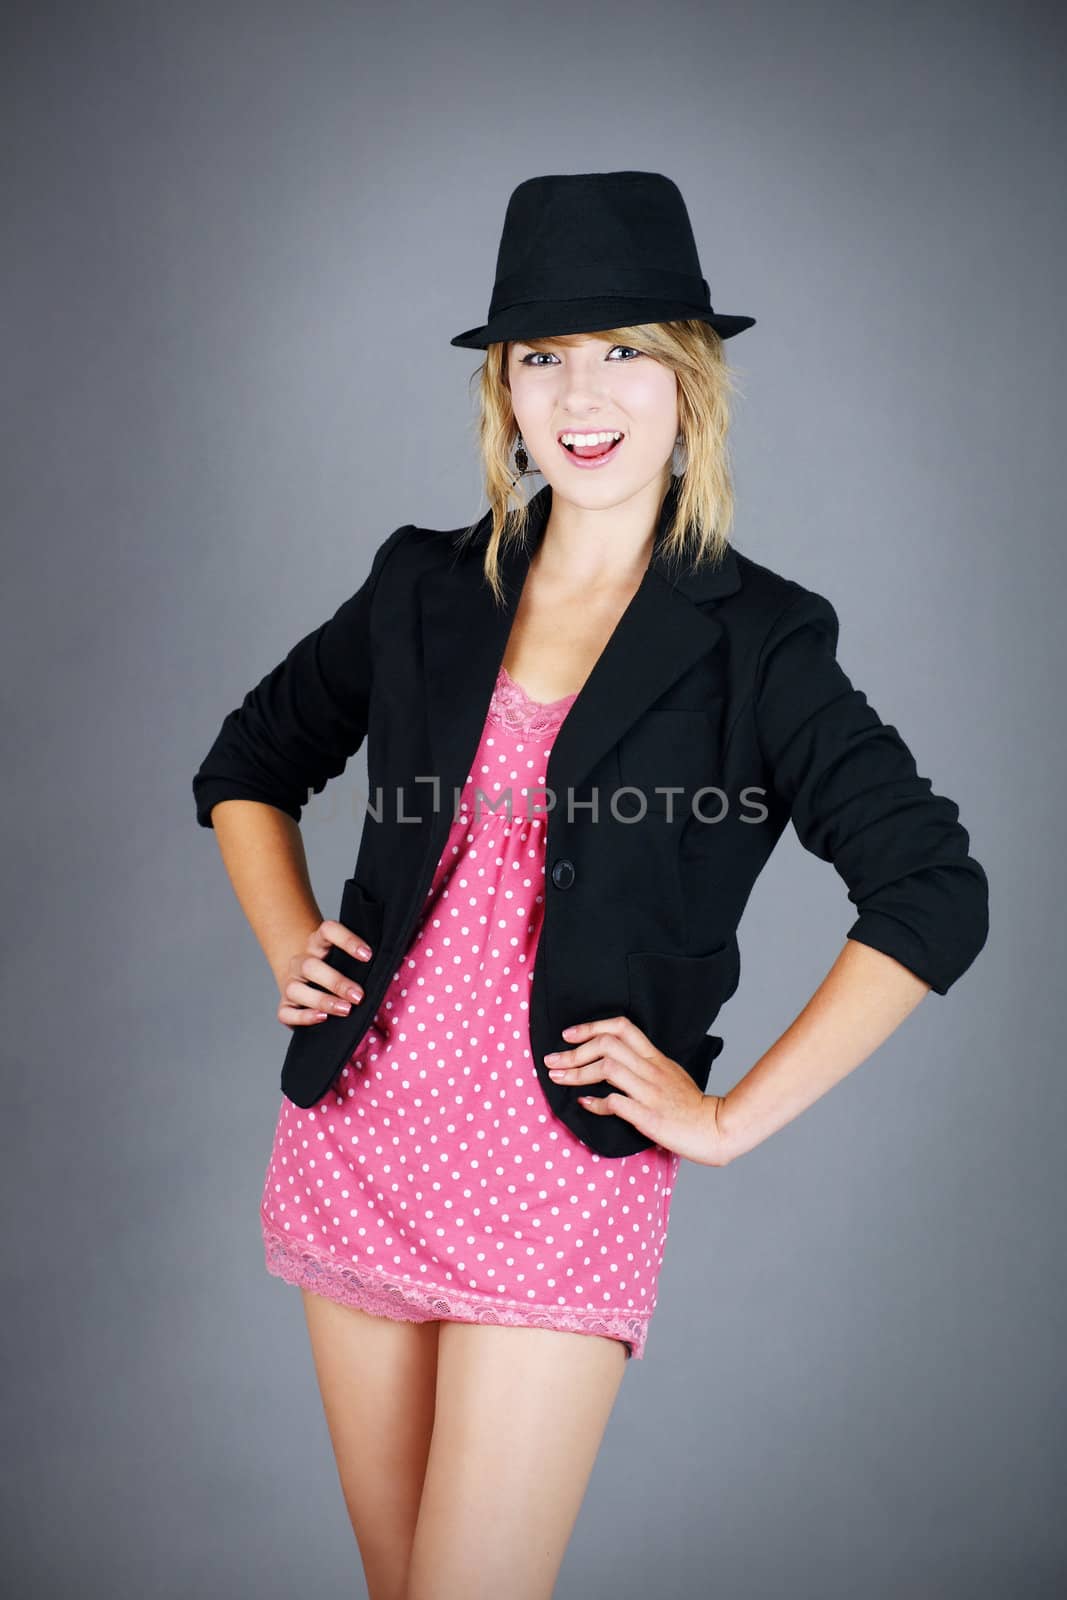 Fun and cute young blond girl burlesque or cabaret dancer ready for the show, studio shot over grey background.